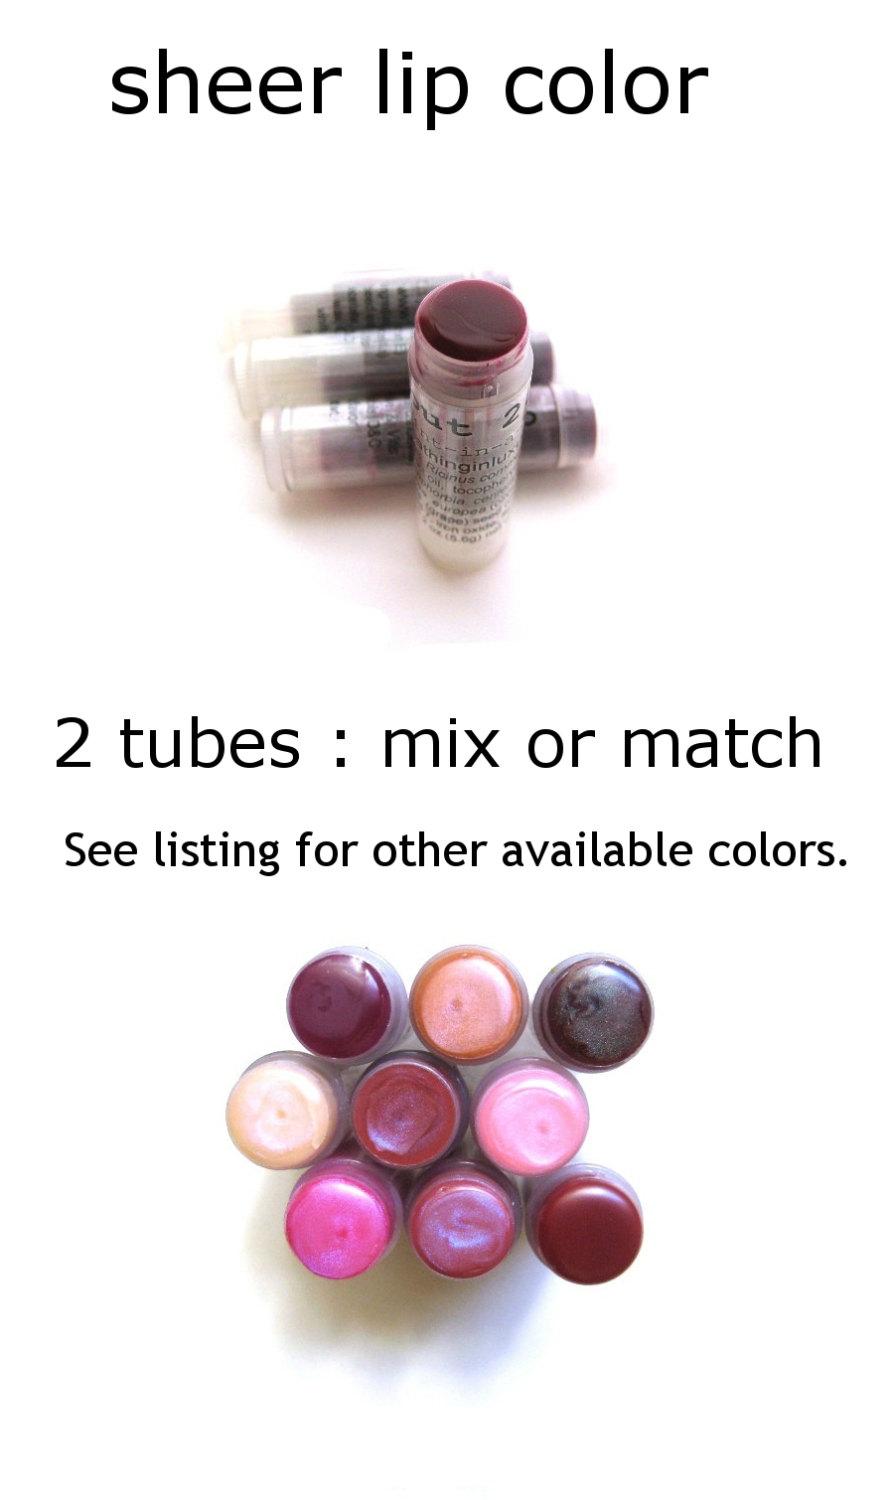 Wedding - Lip Tint 2 Blackberry Lip Tint lip balm Sheer Lip Color Natural sunkiss look any 2 lip tints Mix or Match girlfriend gift for her wife gift